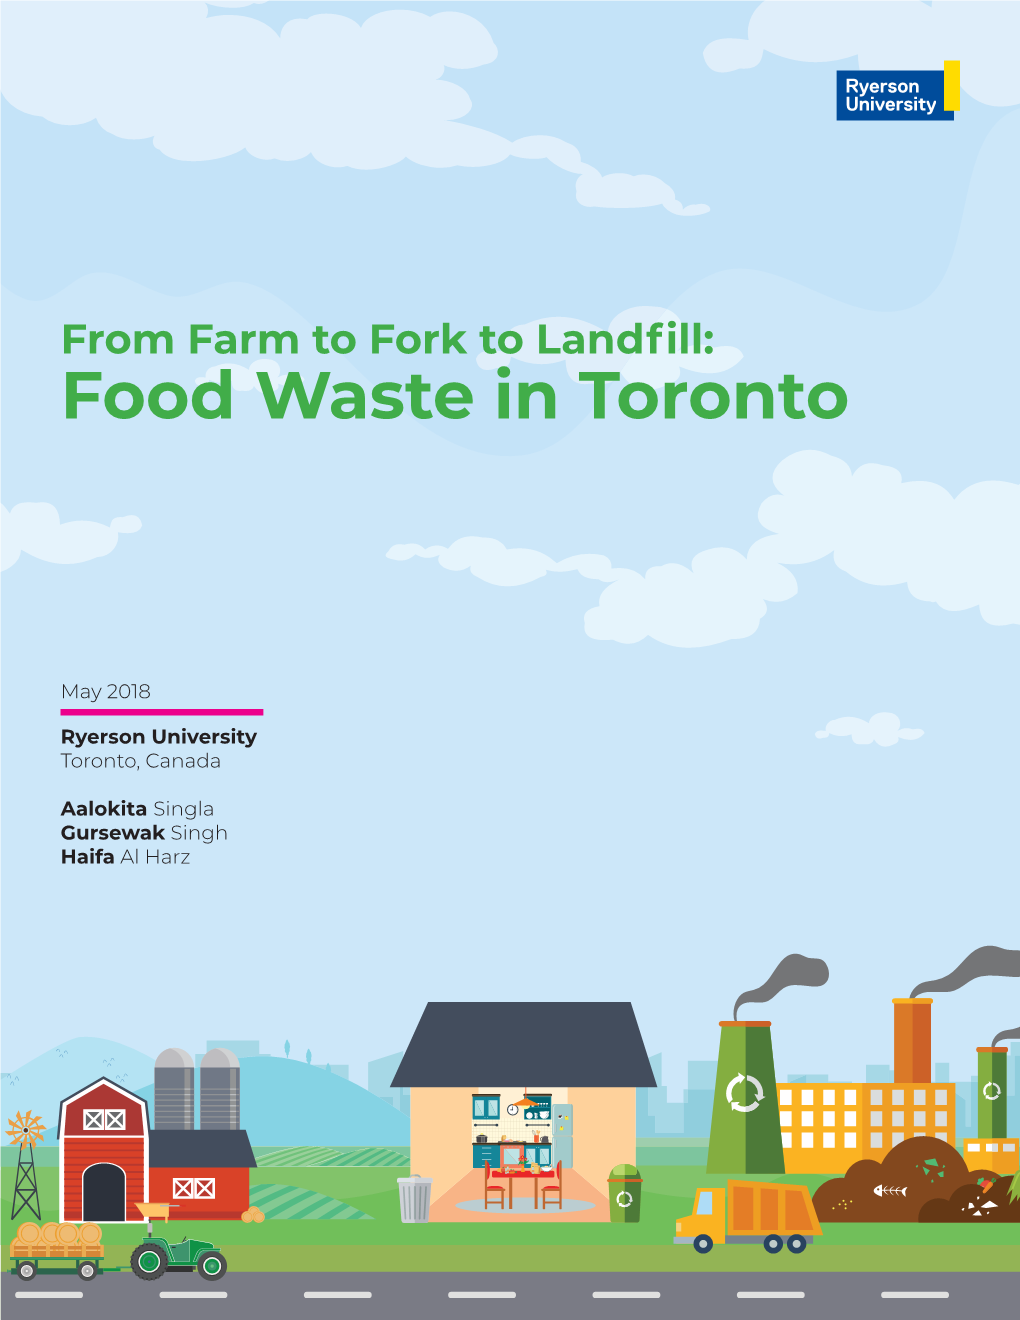 From Farm to Fork to Landfill